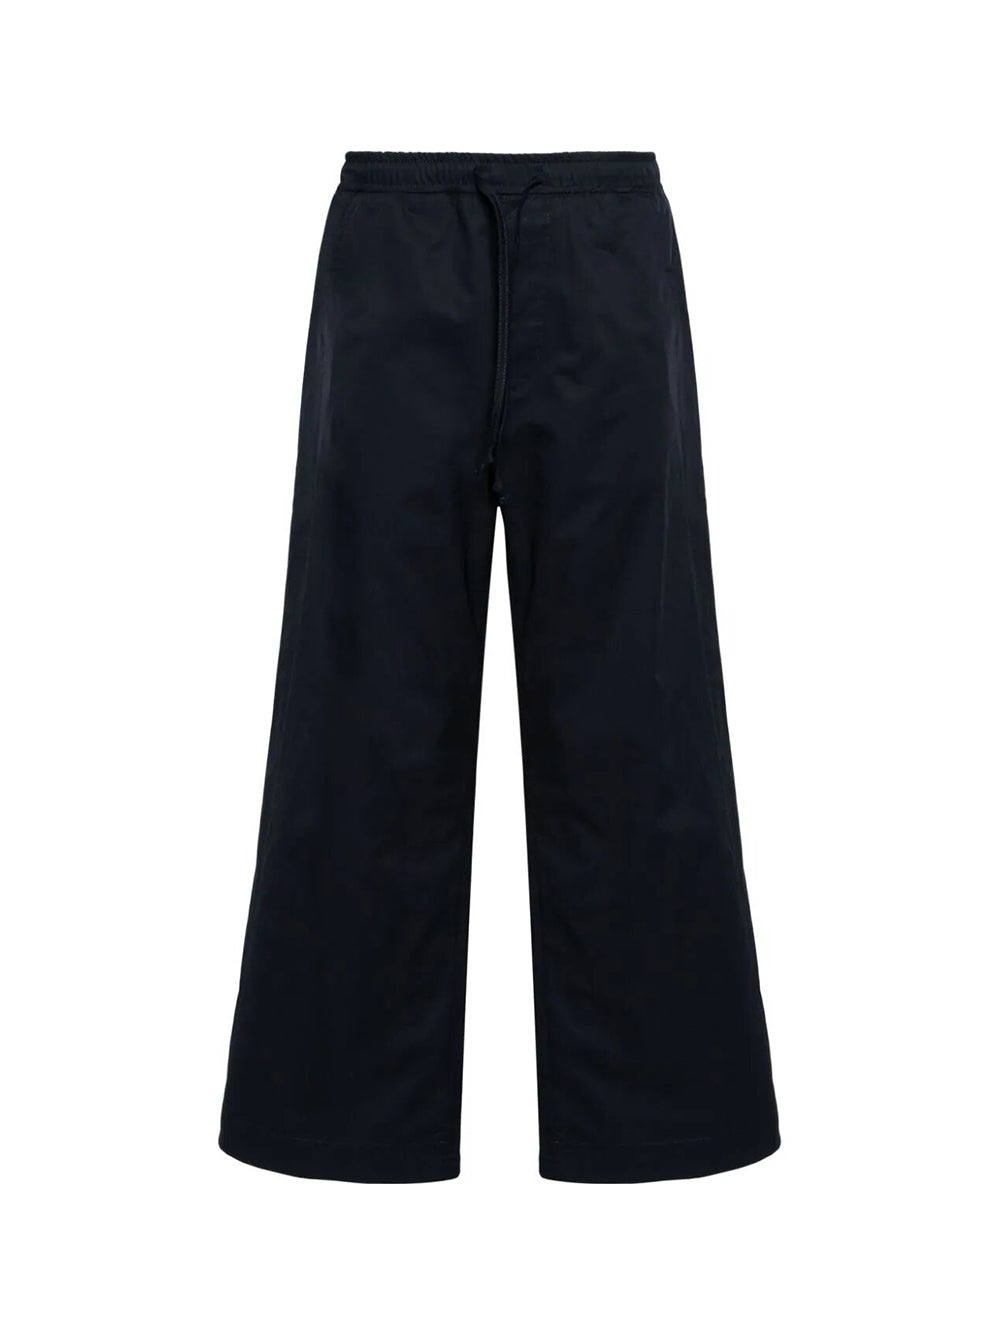 Perfect Palace Dark Navy Trousers